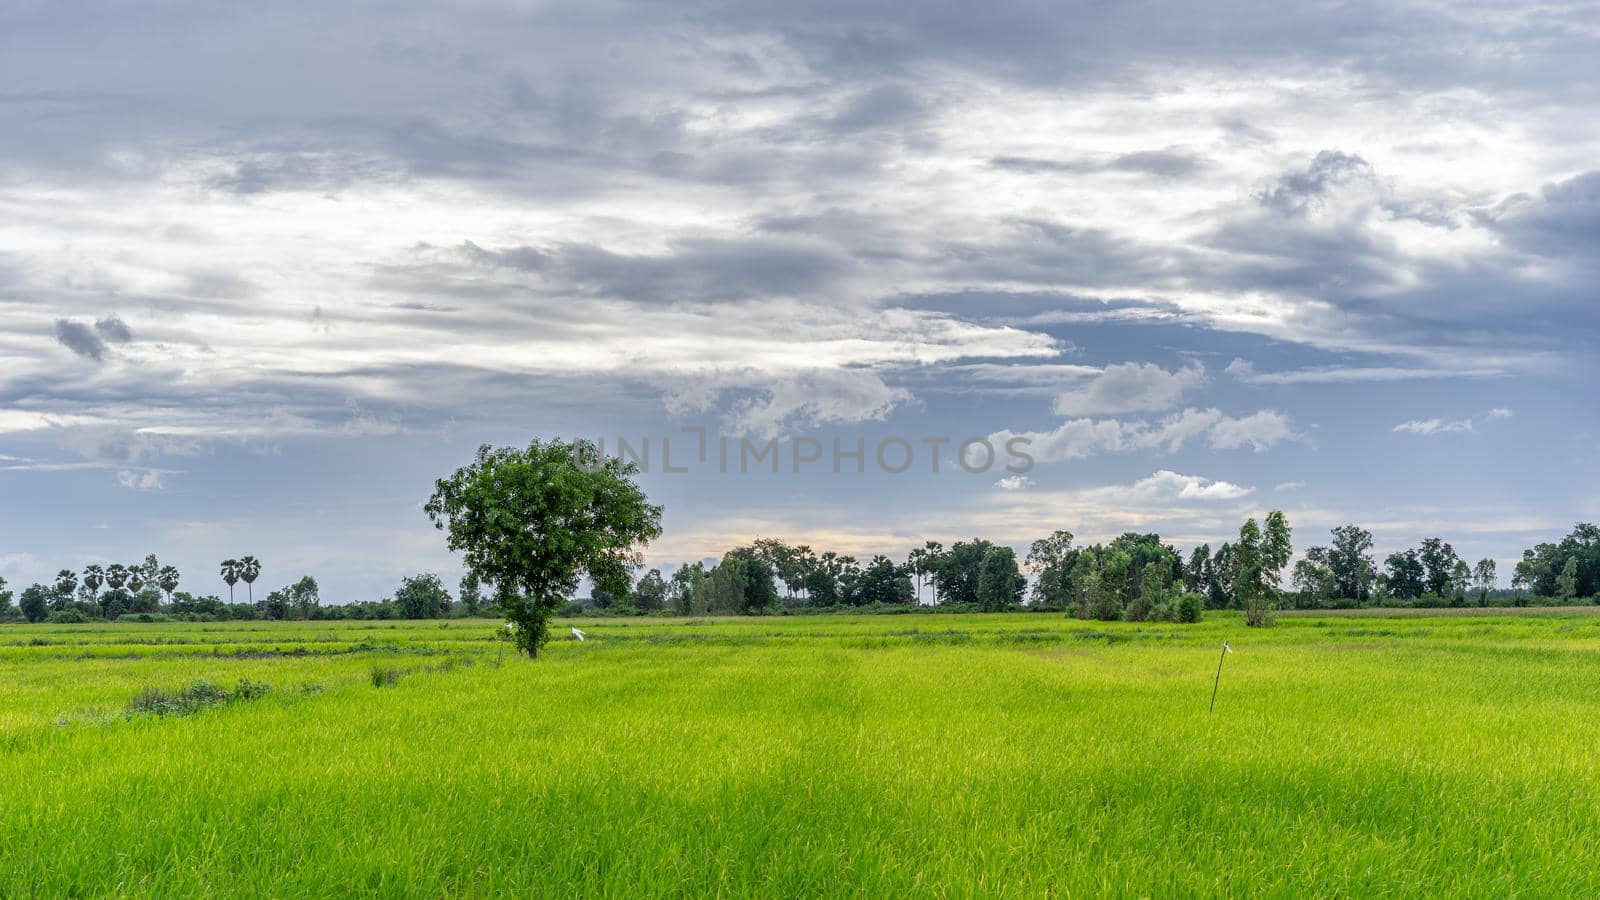 Tree in green field with rainclouds in countryside by domonite